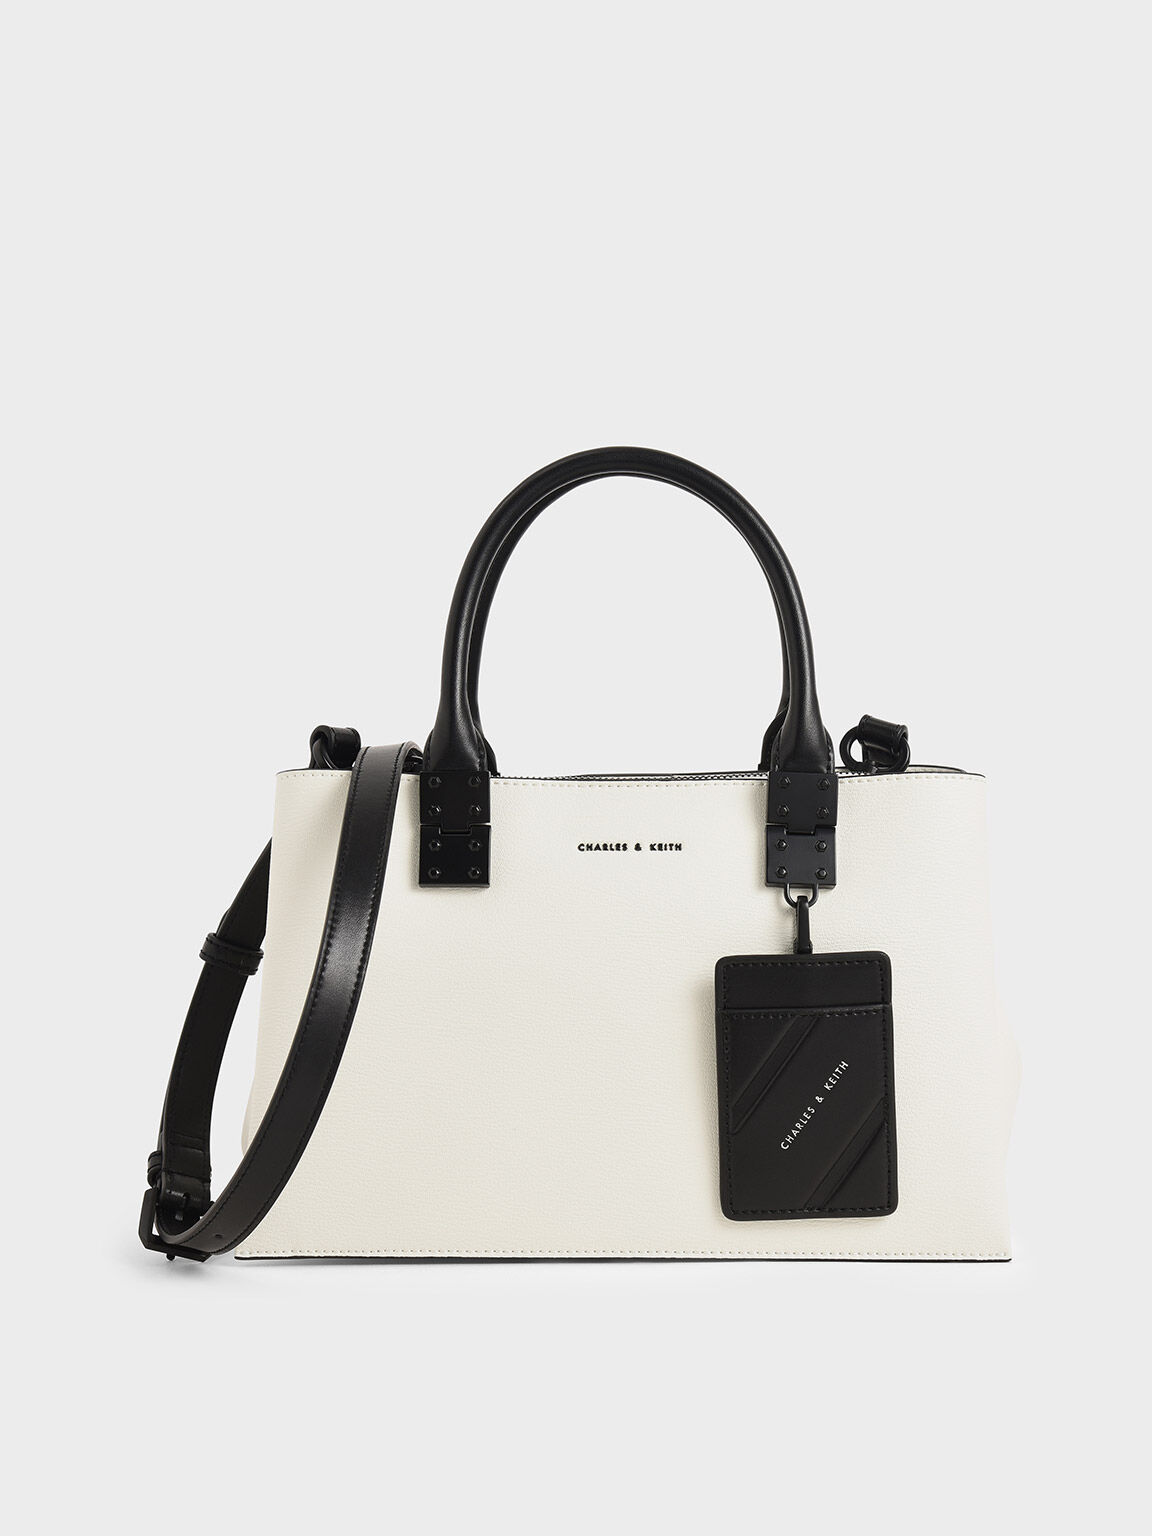 Charles & Keith - Women's Classic Double Top Handle Bag, White, M